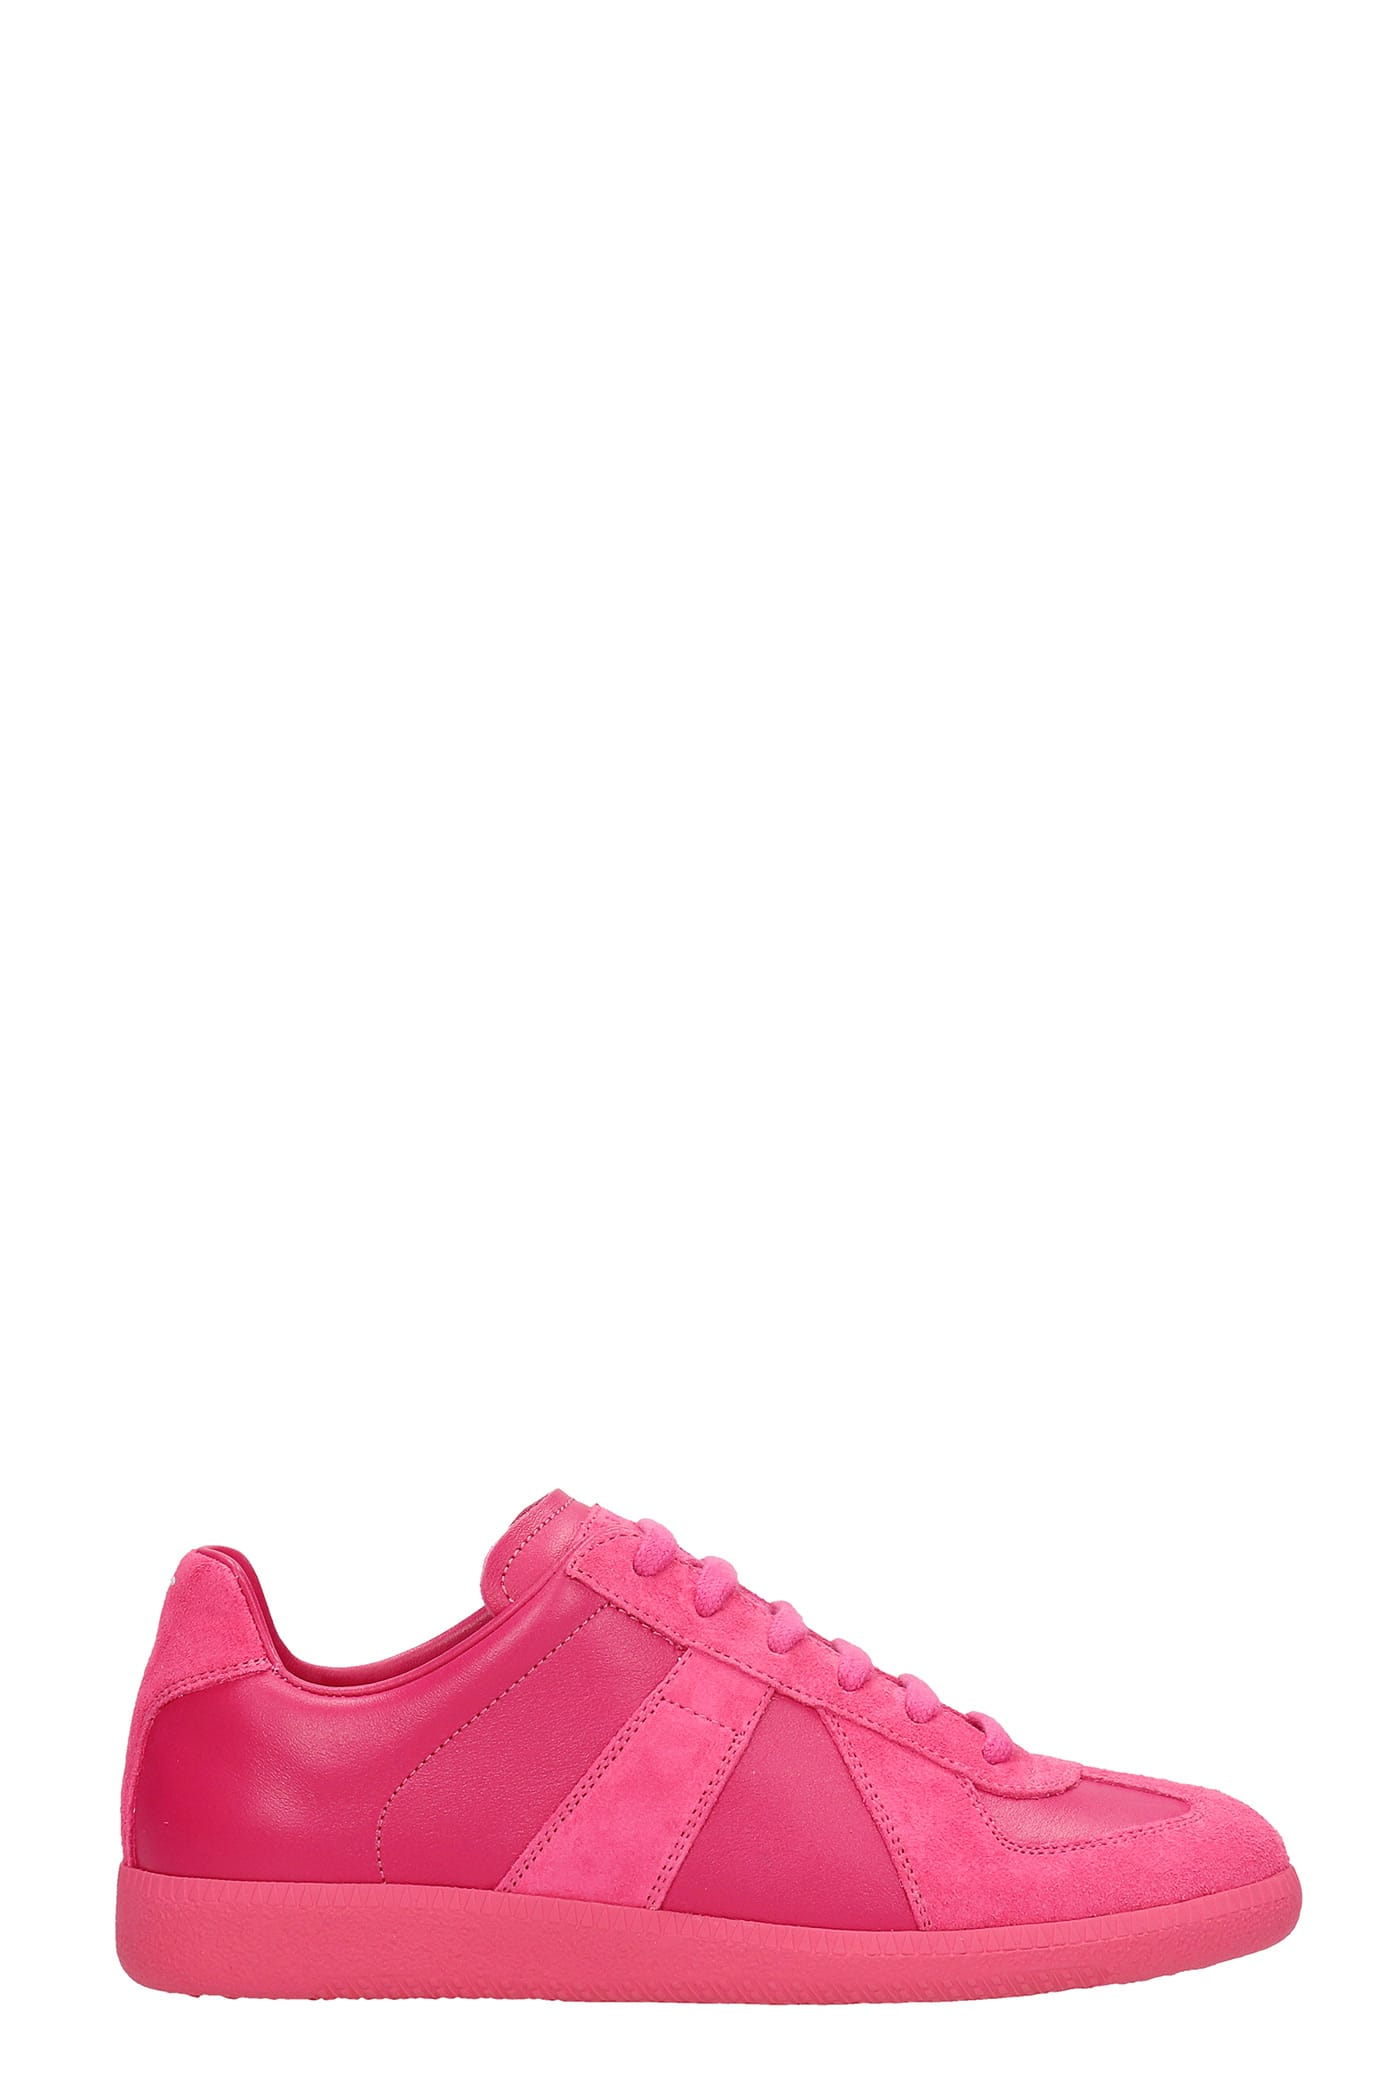 Maison Margiela Replica Sneakers In Fuxia Suede And Leather